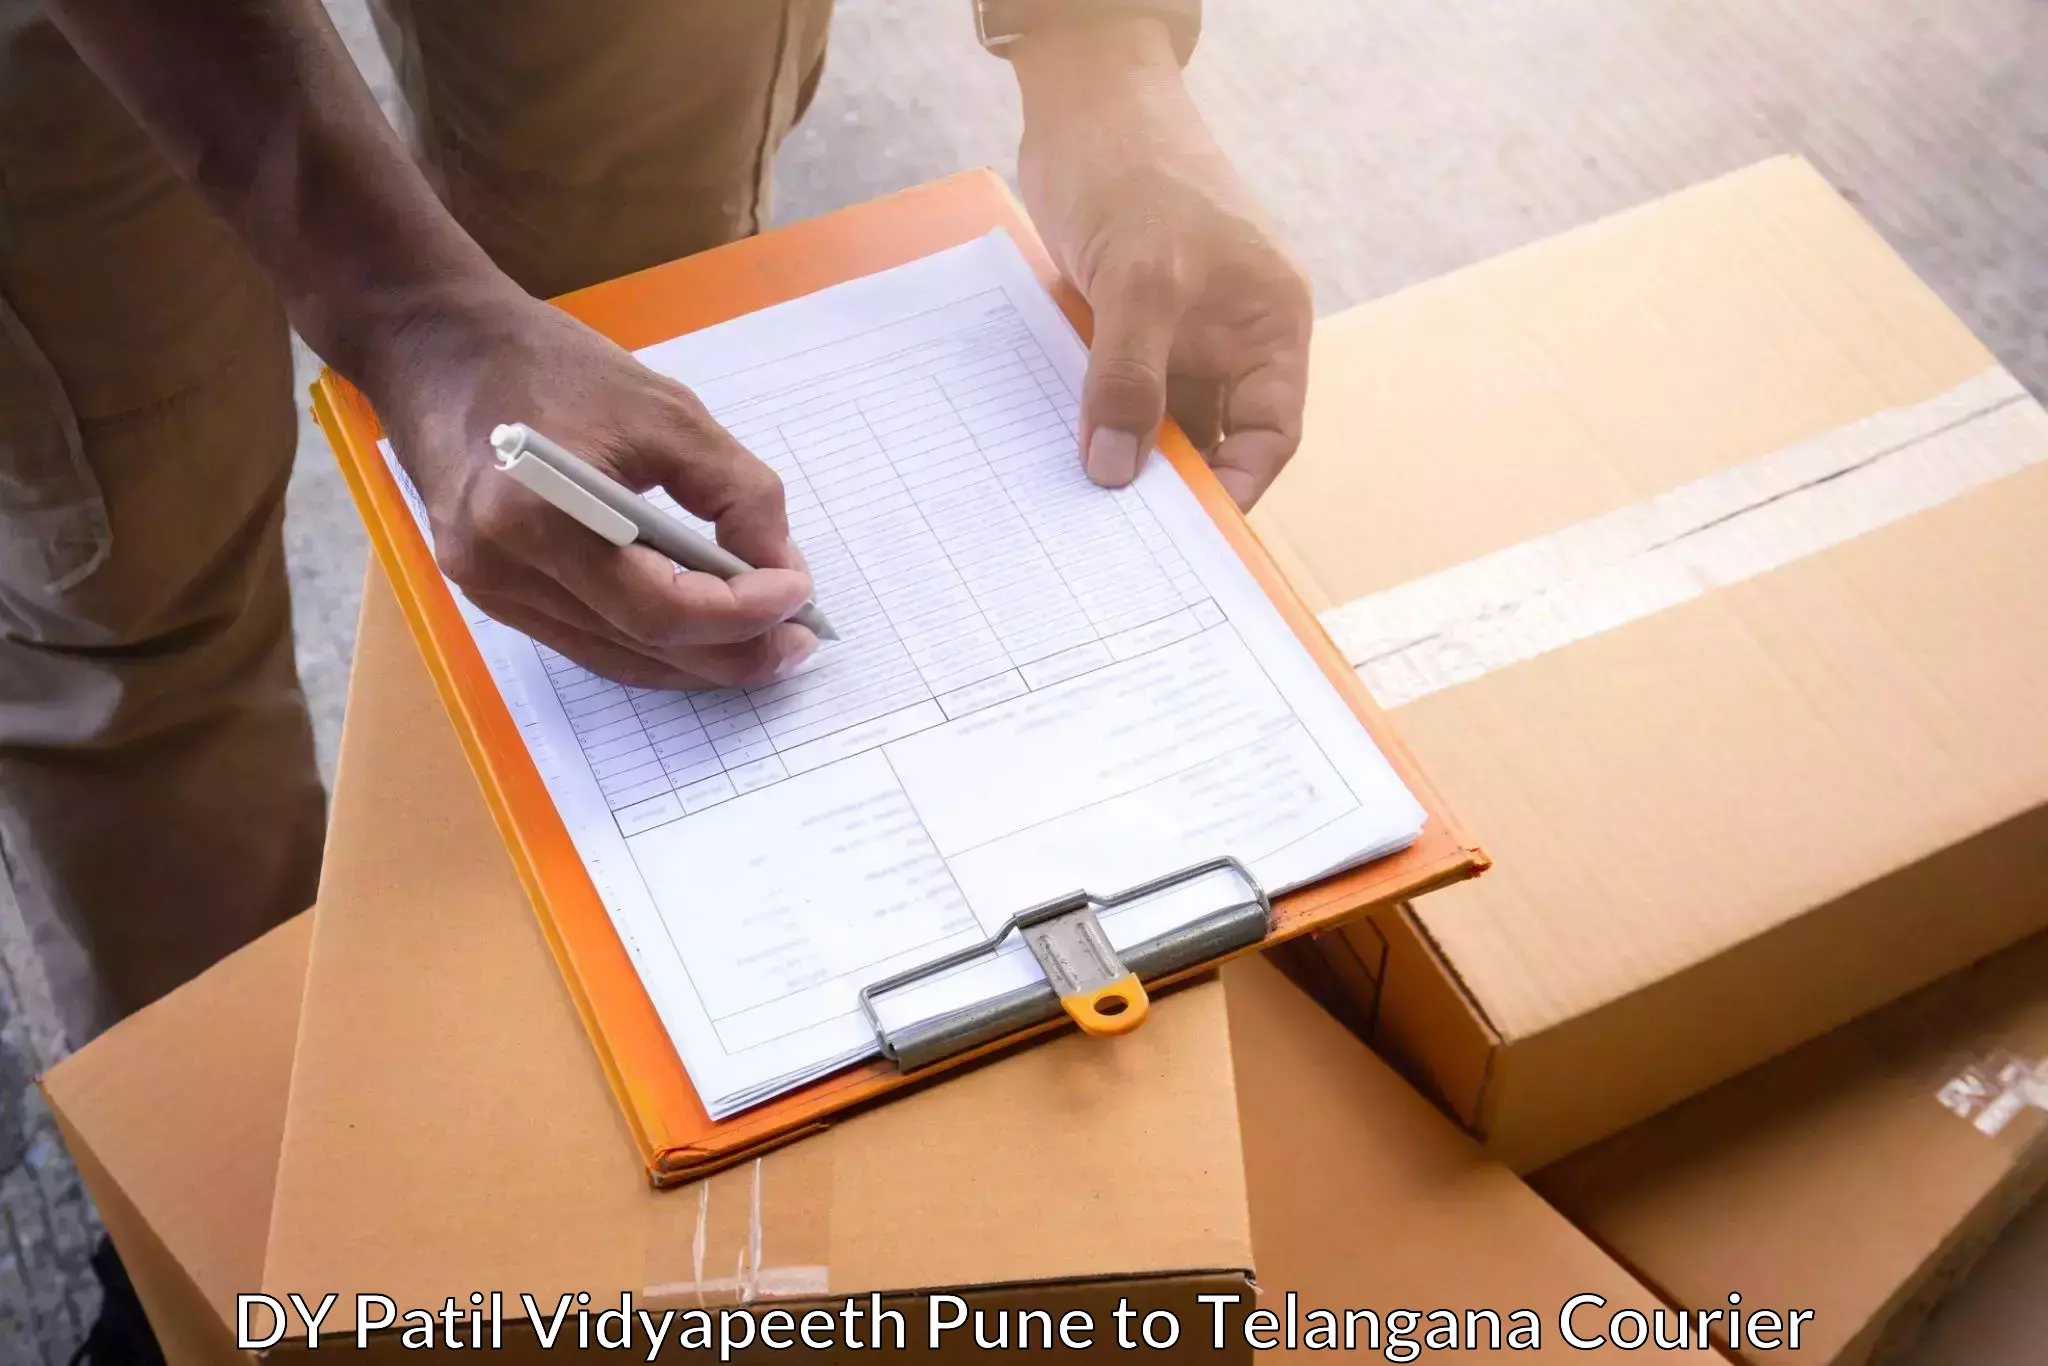 Express delivery capabilities DY Patil Vidyapeeth Pune to Cherial